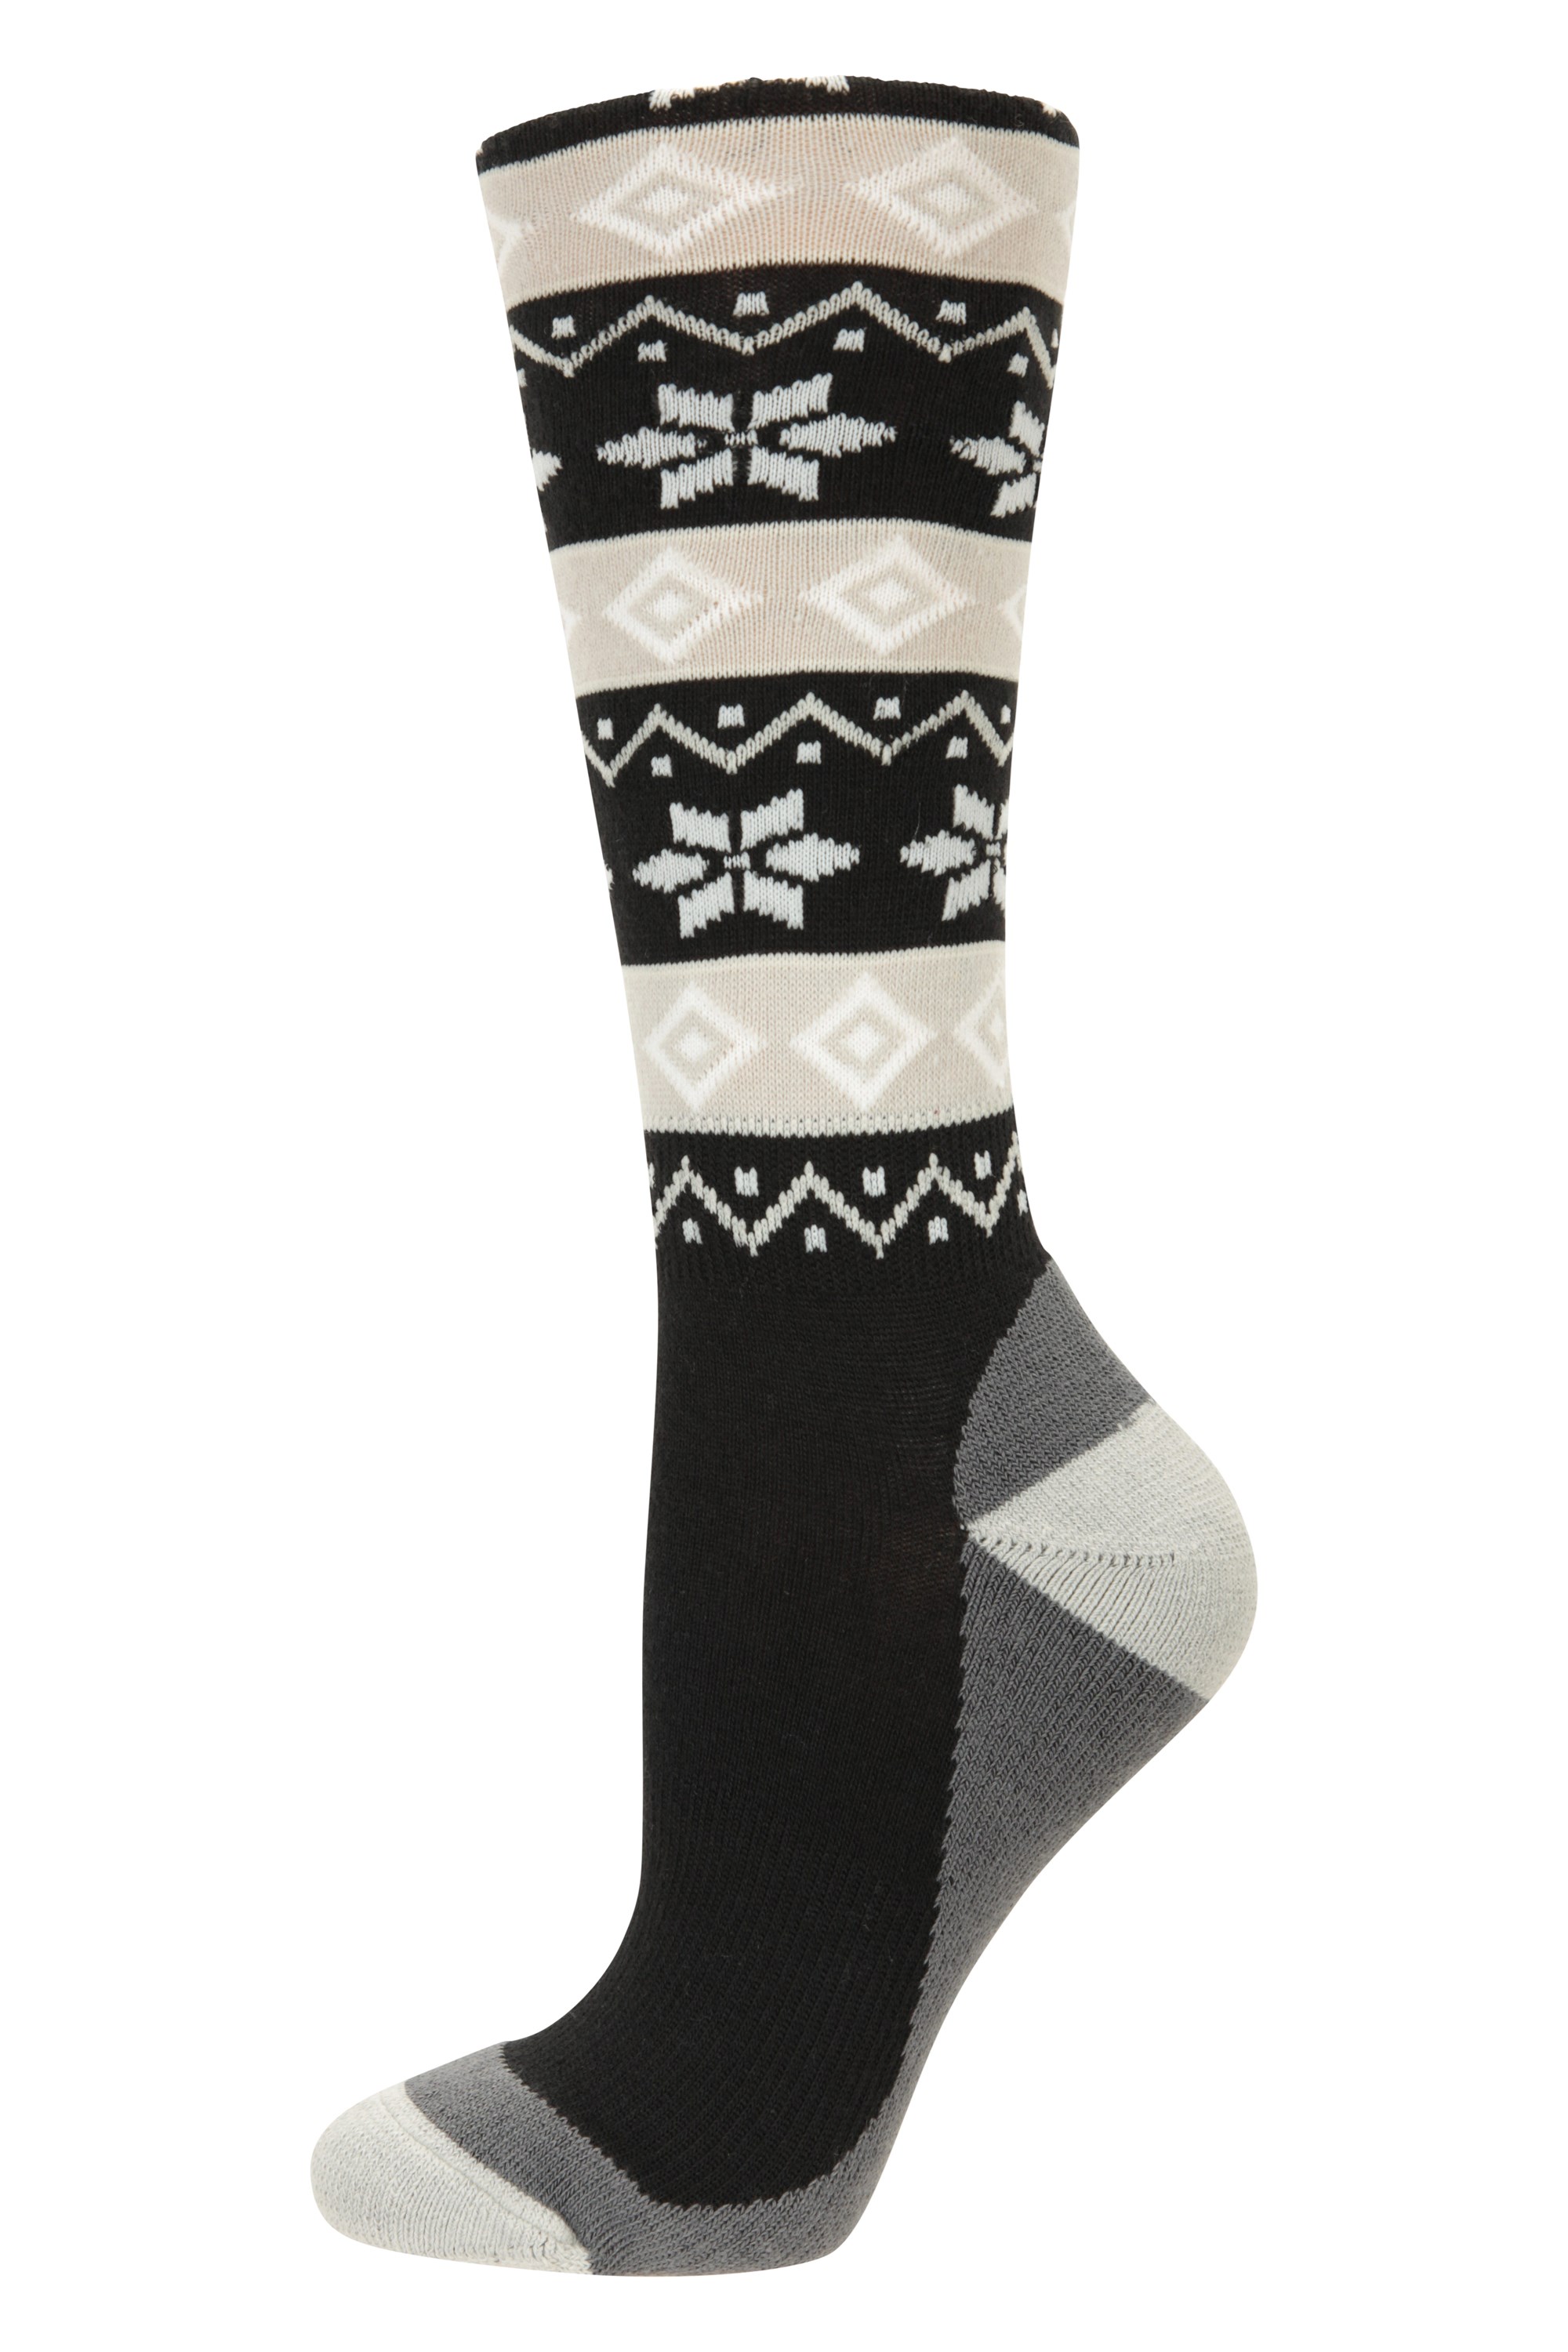 Mountain Warehouse Wms  Womens Welly Socks Quick Wicking In Black One Size 